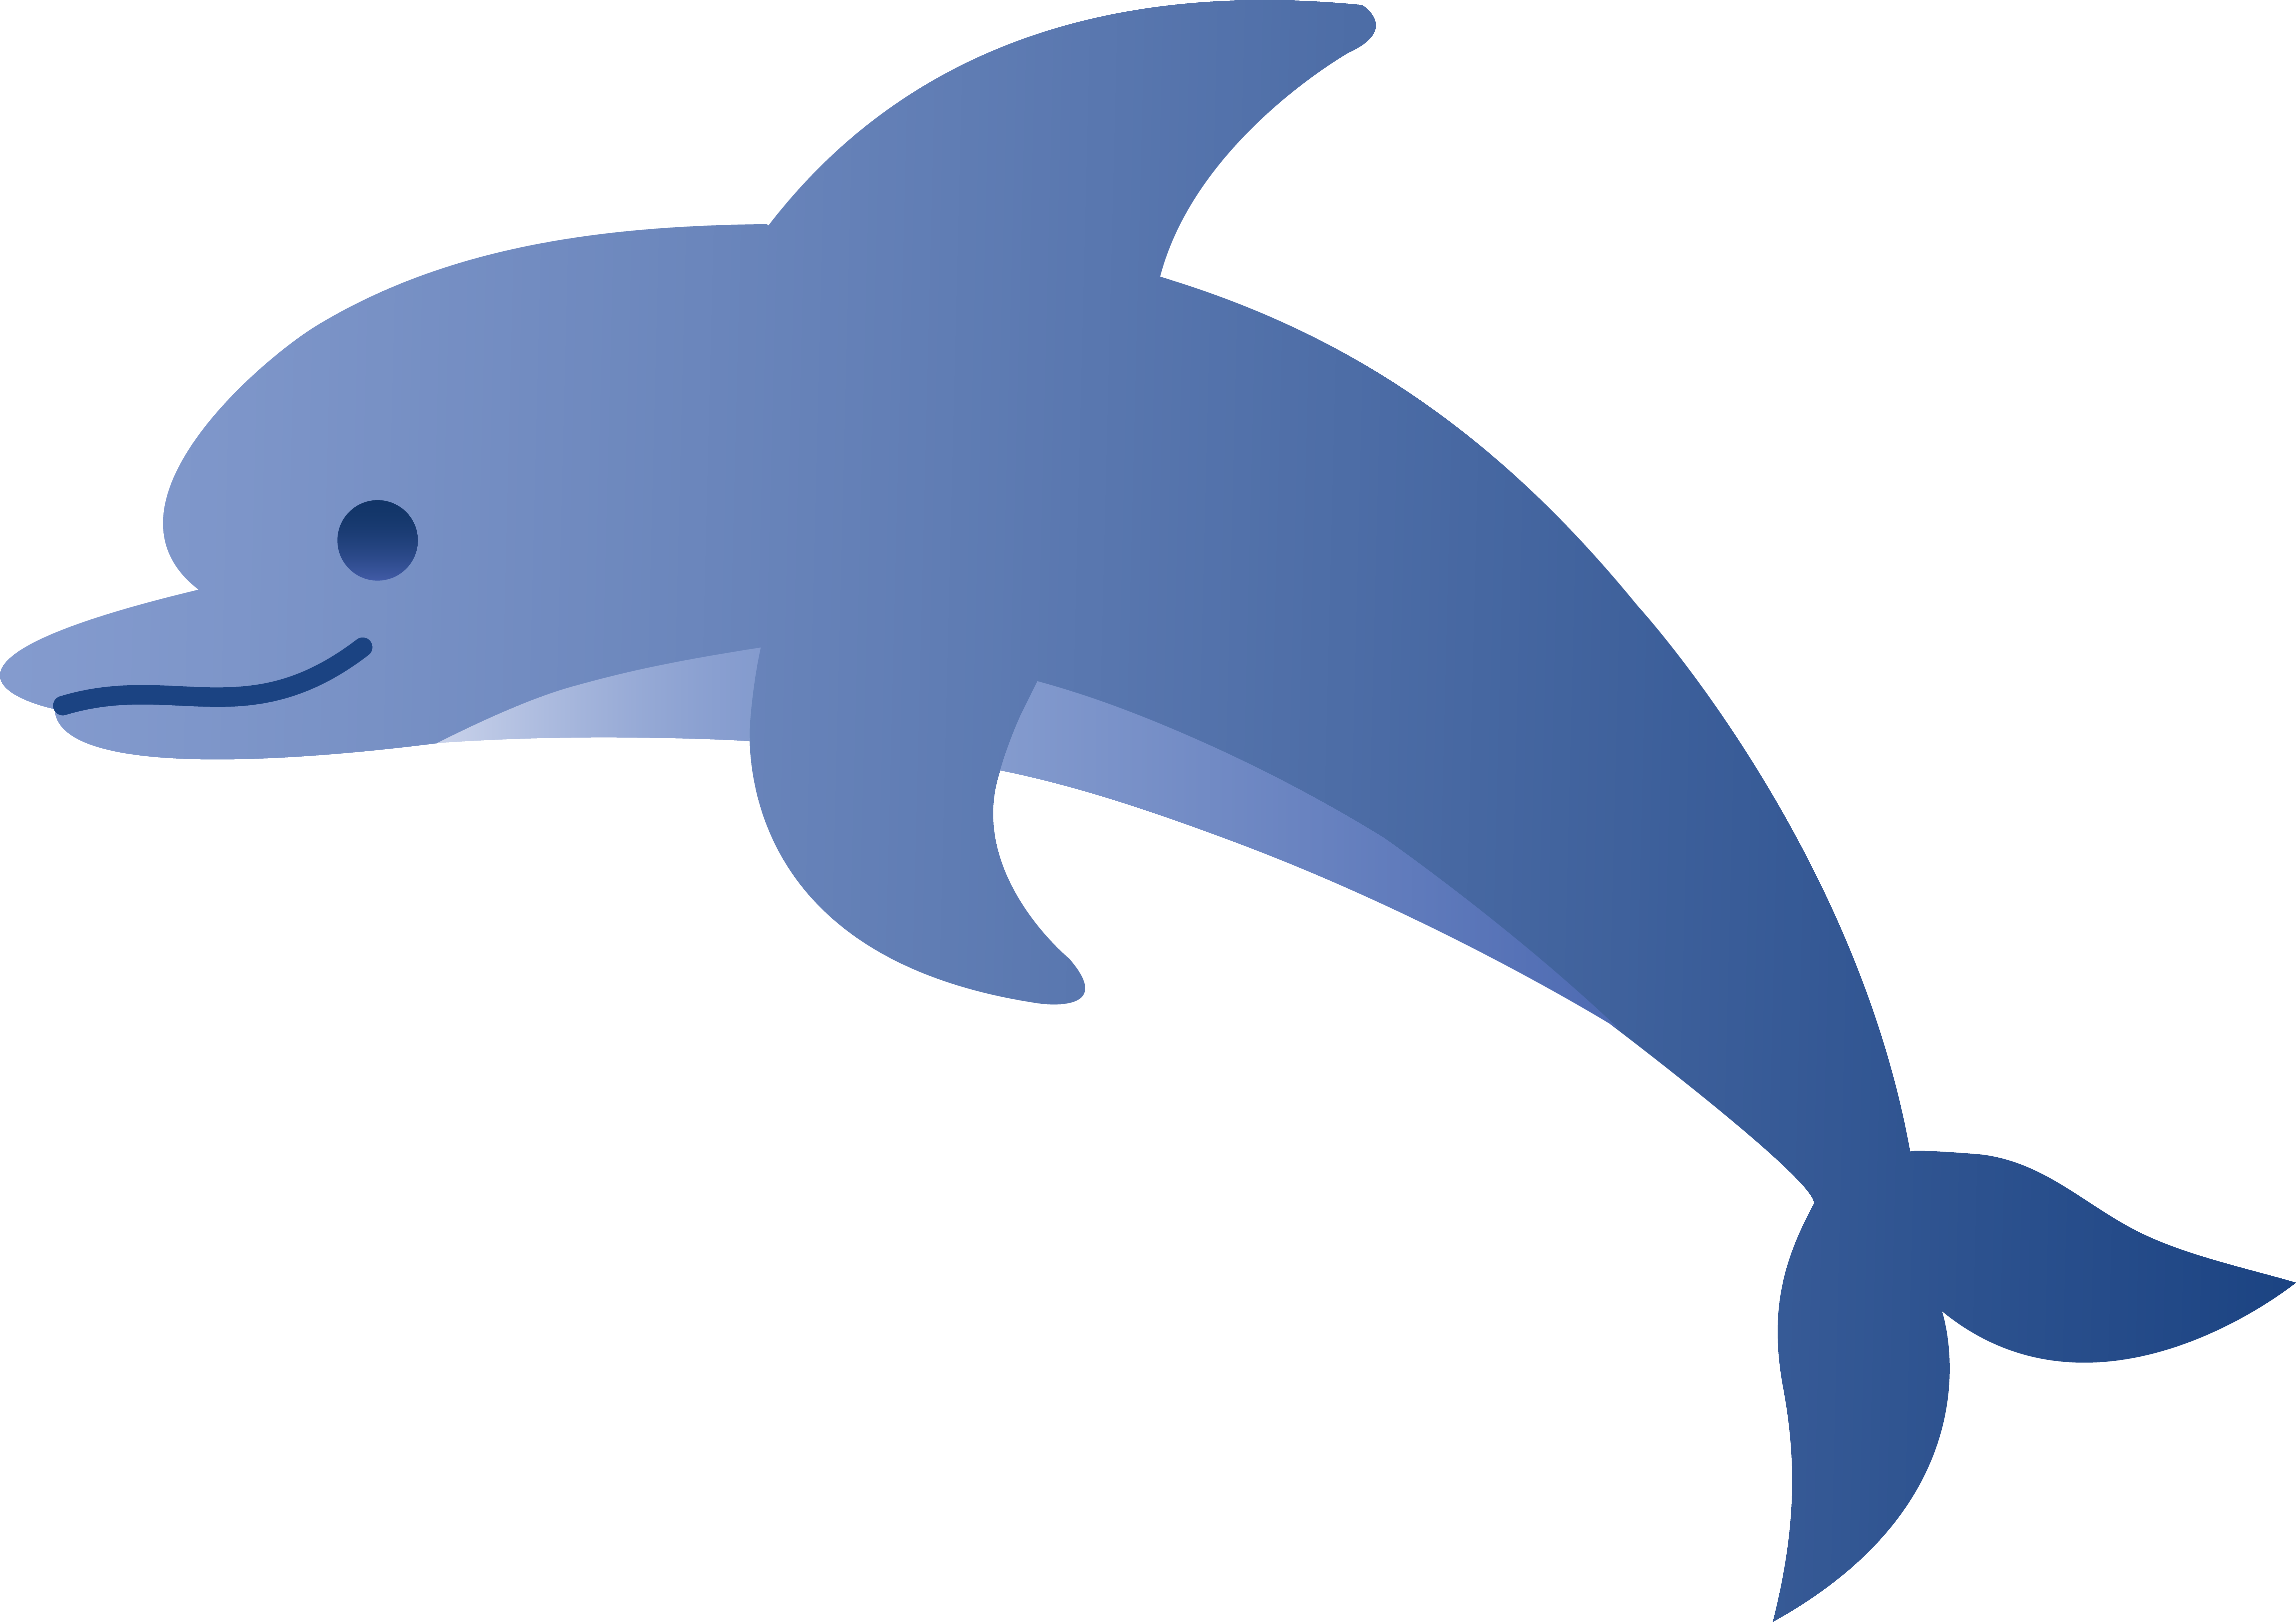 Bottlenose Dolphin clipart #3, Download drawings